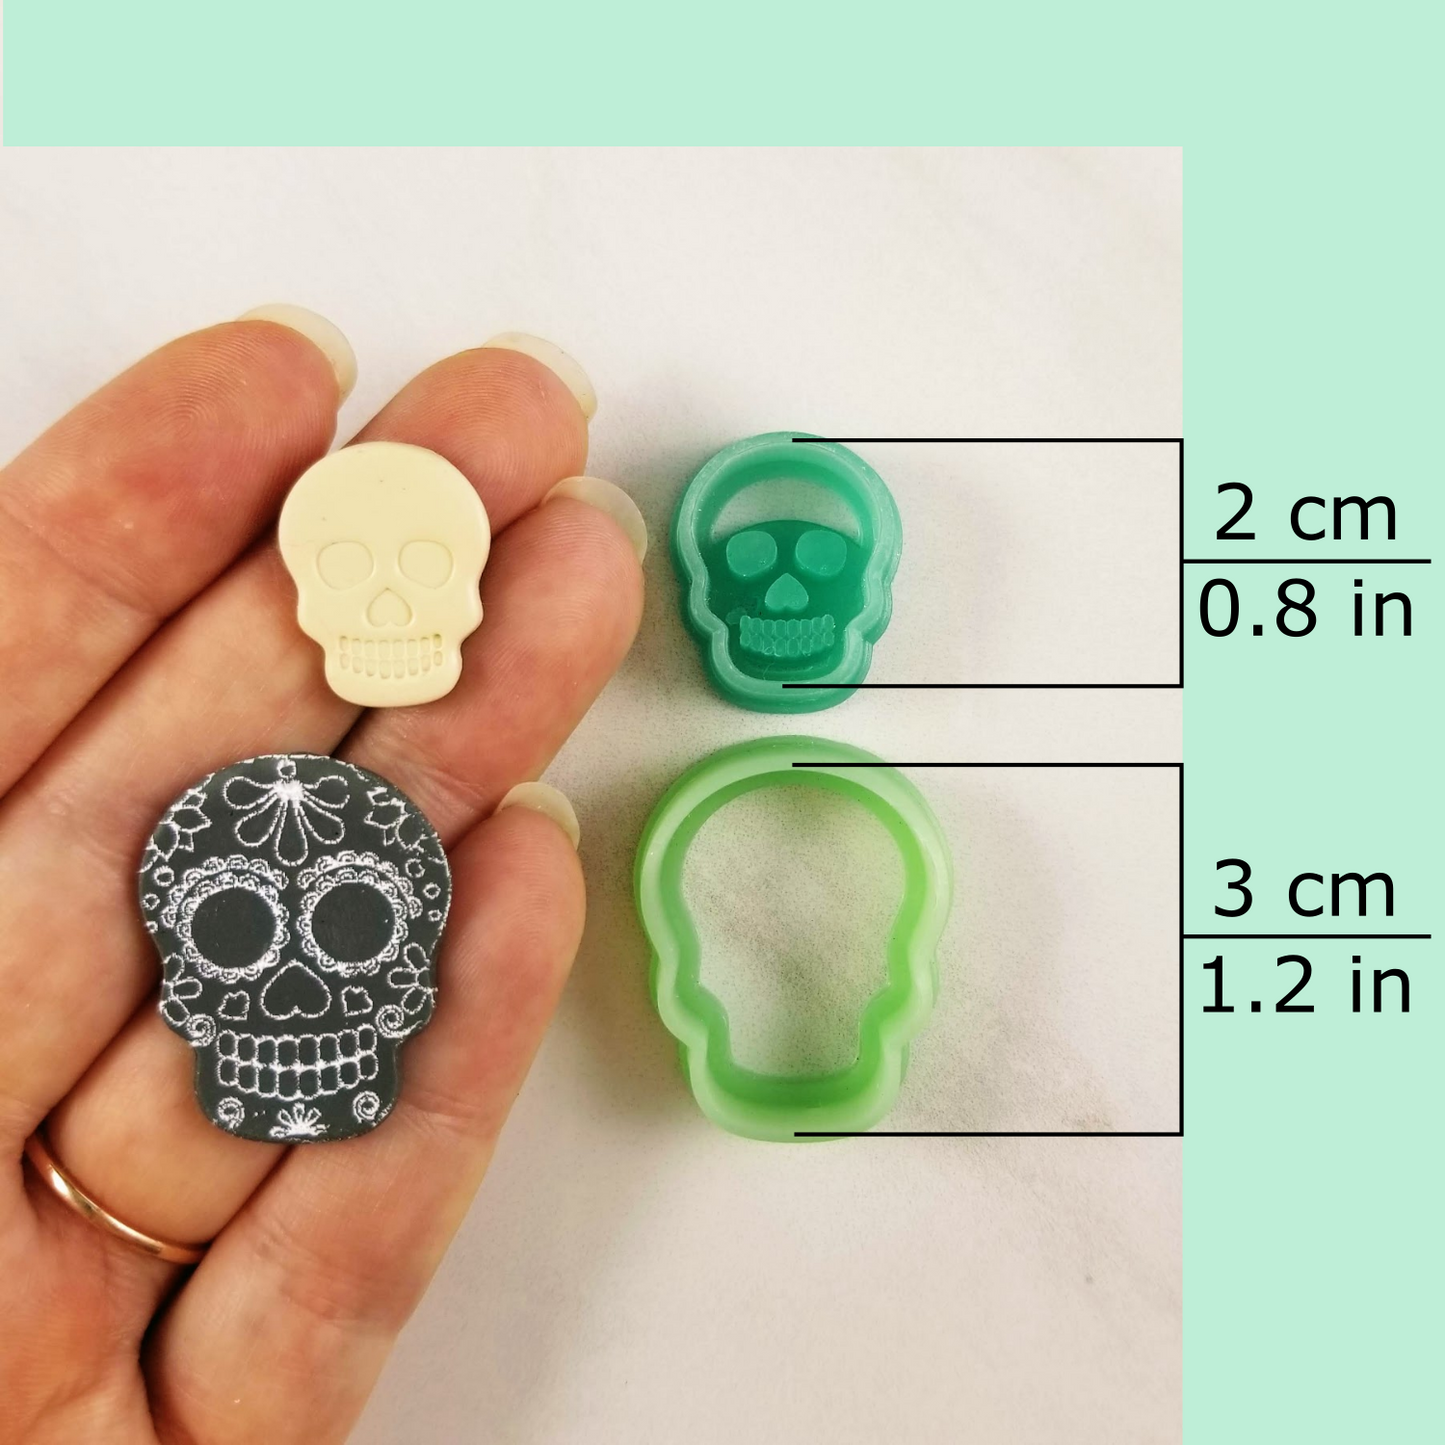 Debossing/embossing and outline skull polymer clay cutters dimensions: small, dangle, stud sizes.